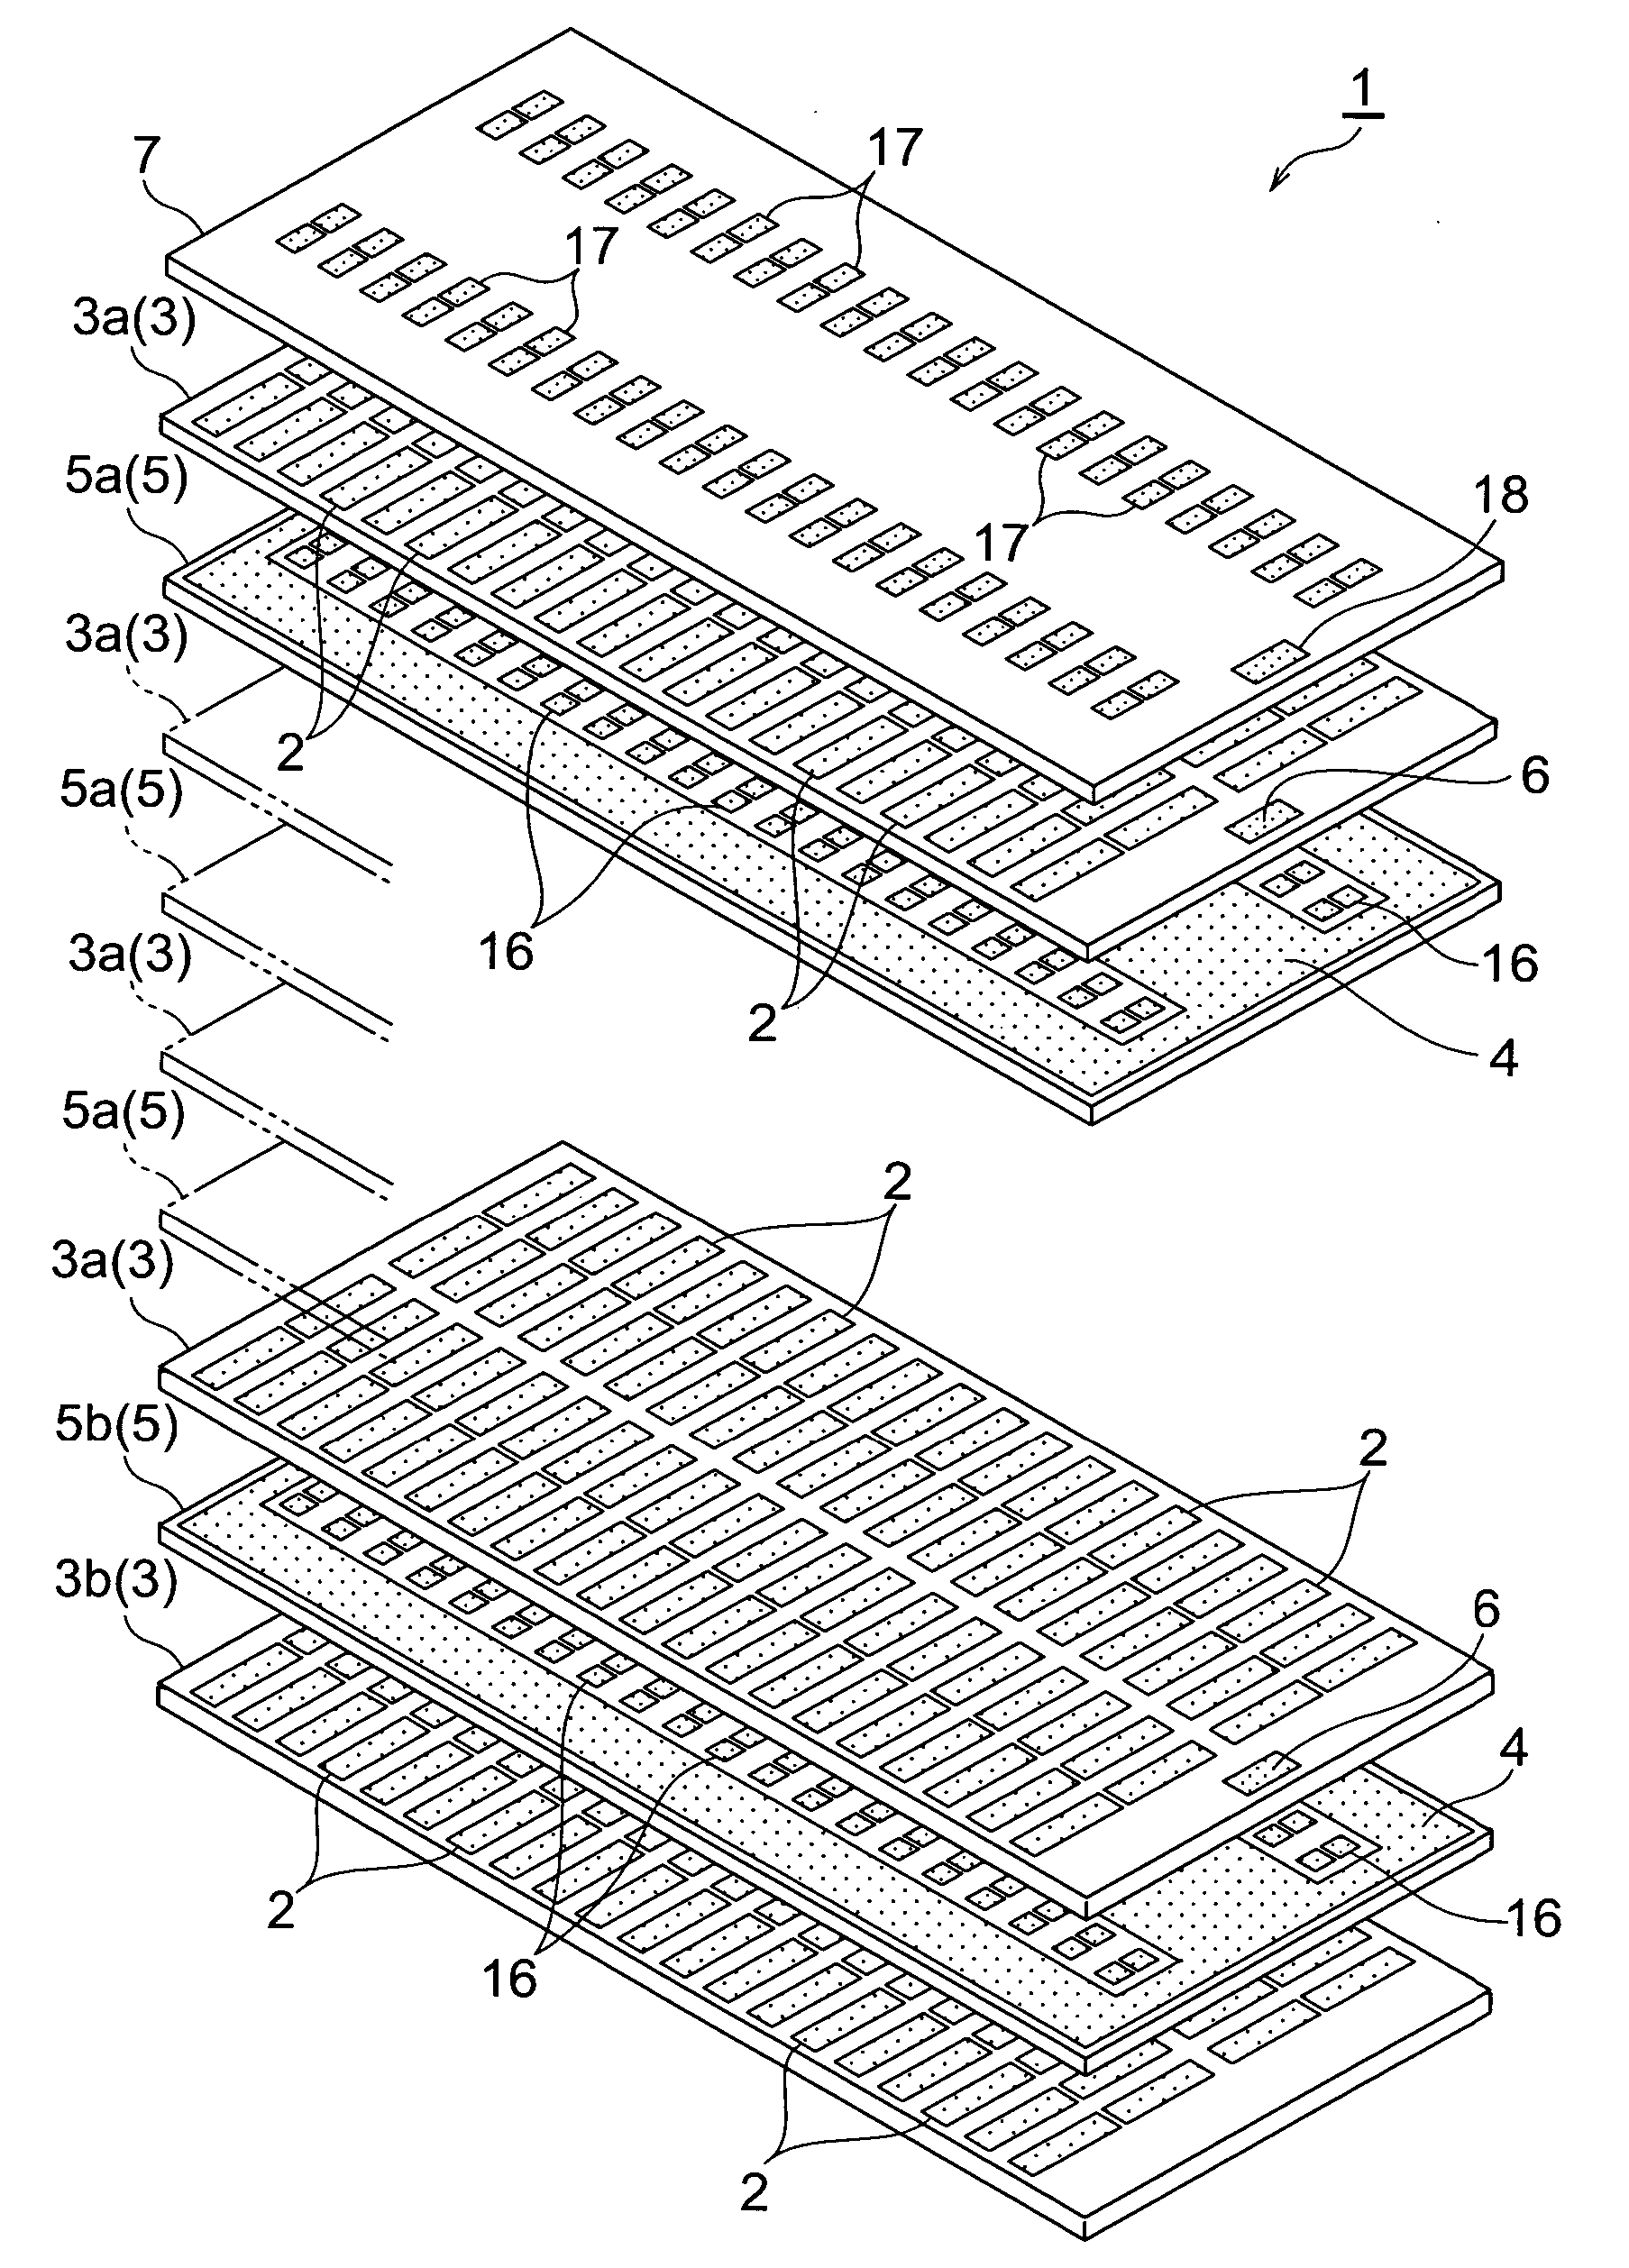 Multilayer ceramic device, method for manufacturing the same, and ceramic device